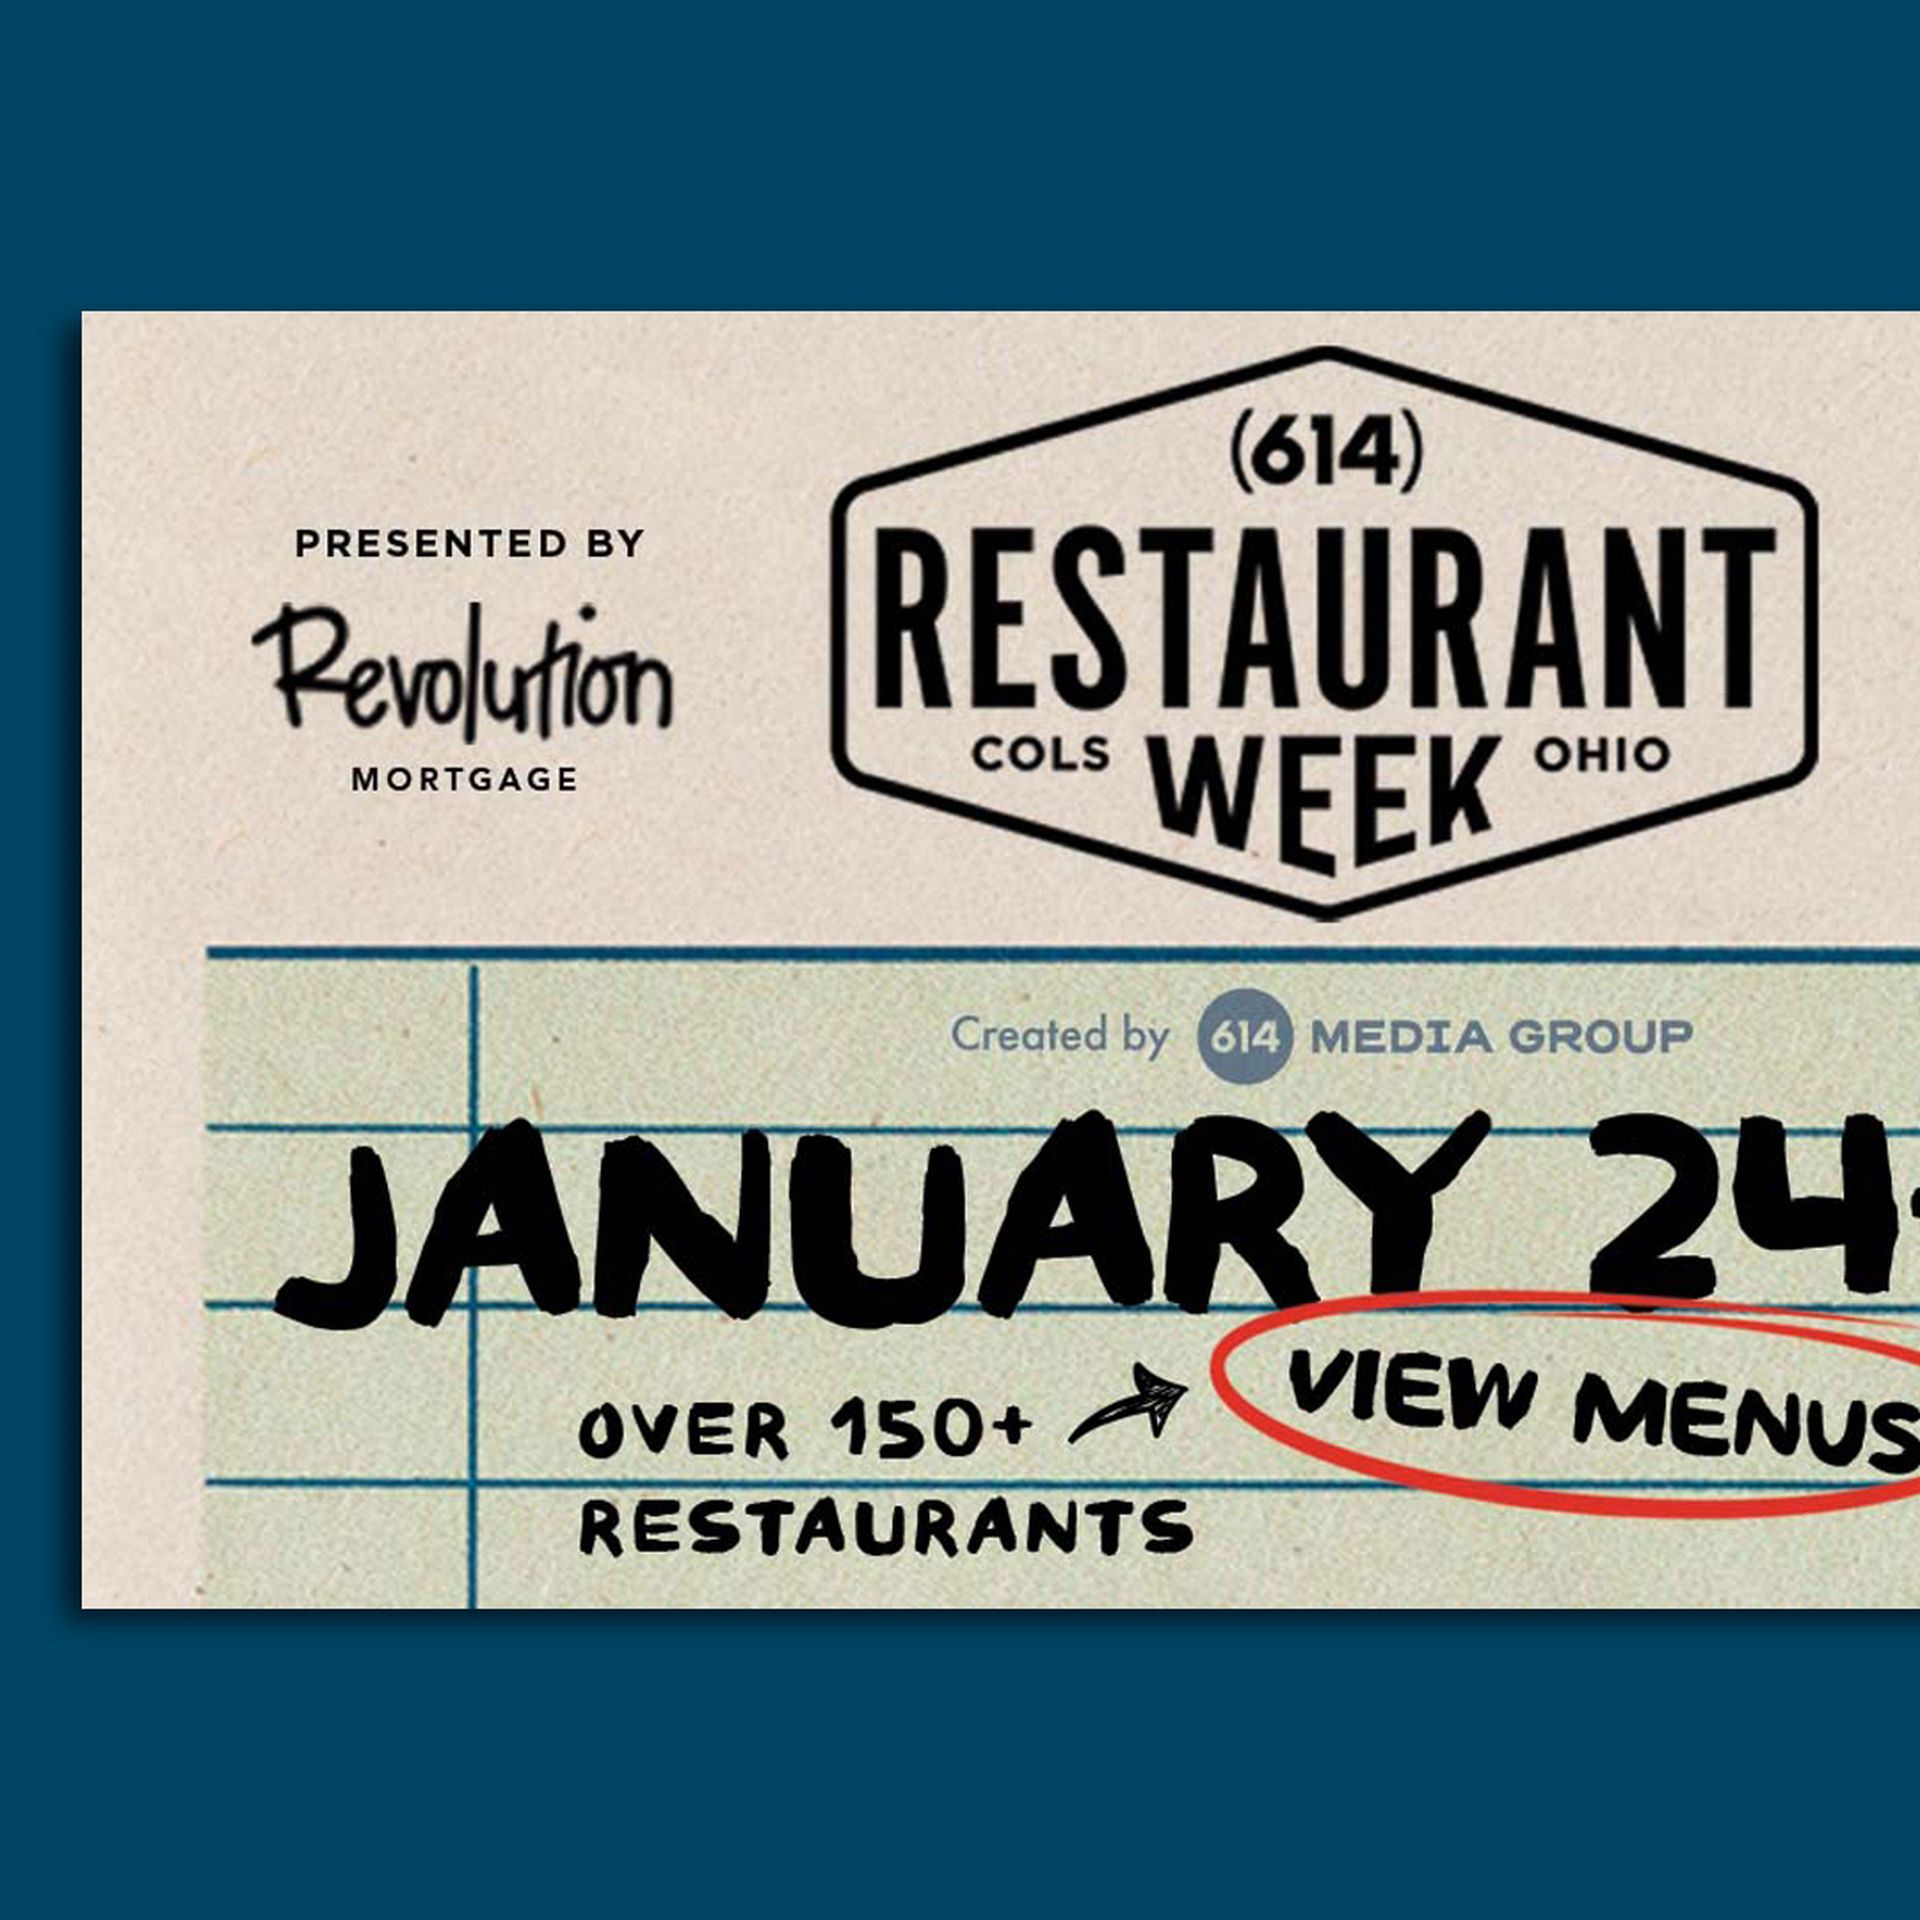 A logo for 614 Restaurant Week featuring the January 24-29 date, sponsors and a menu teaser